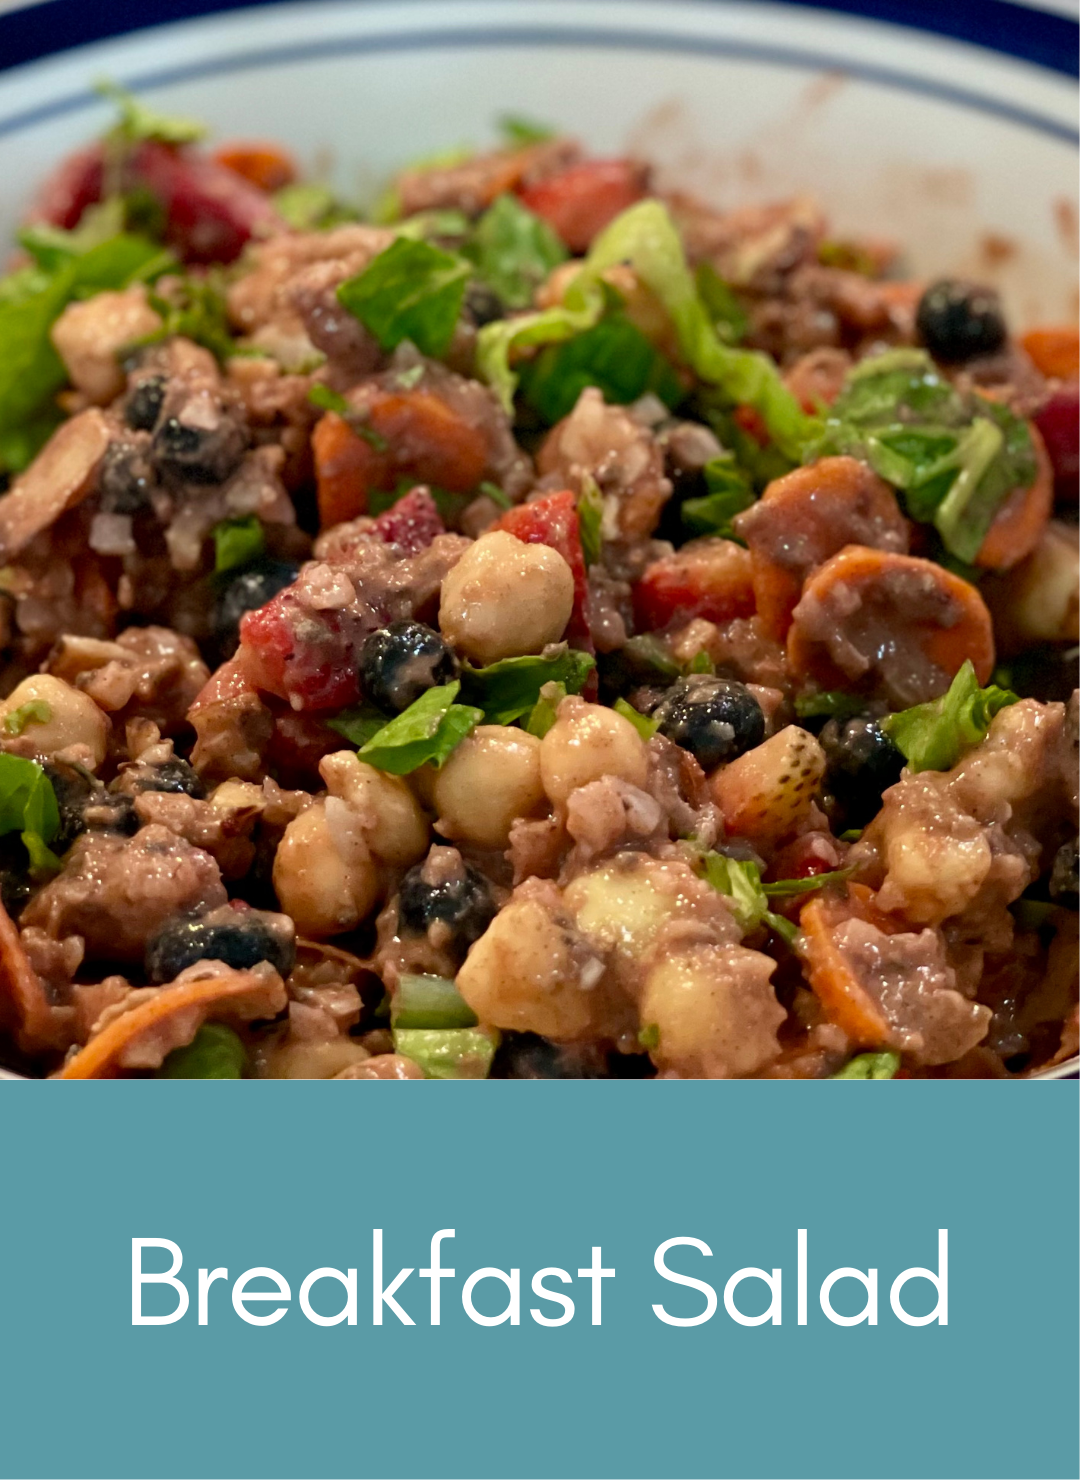 Breakfast salad Picture with link to recipe